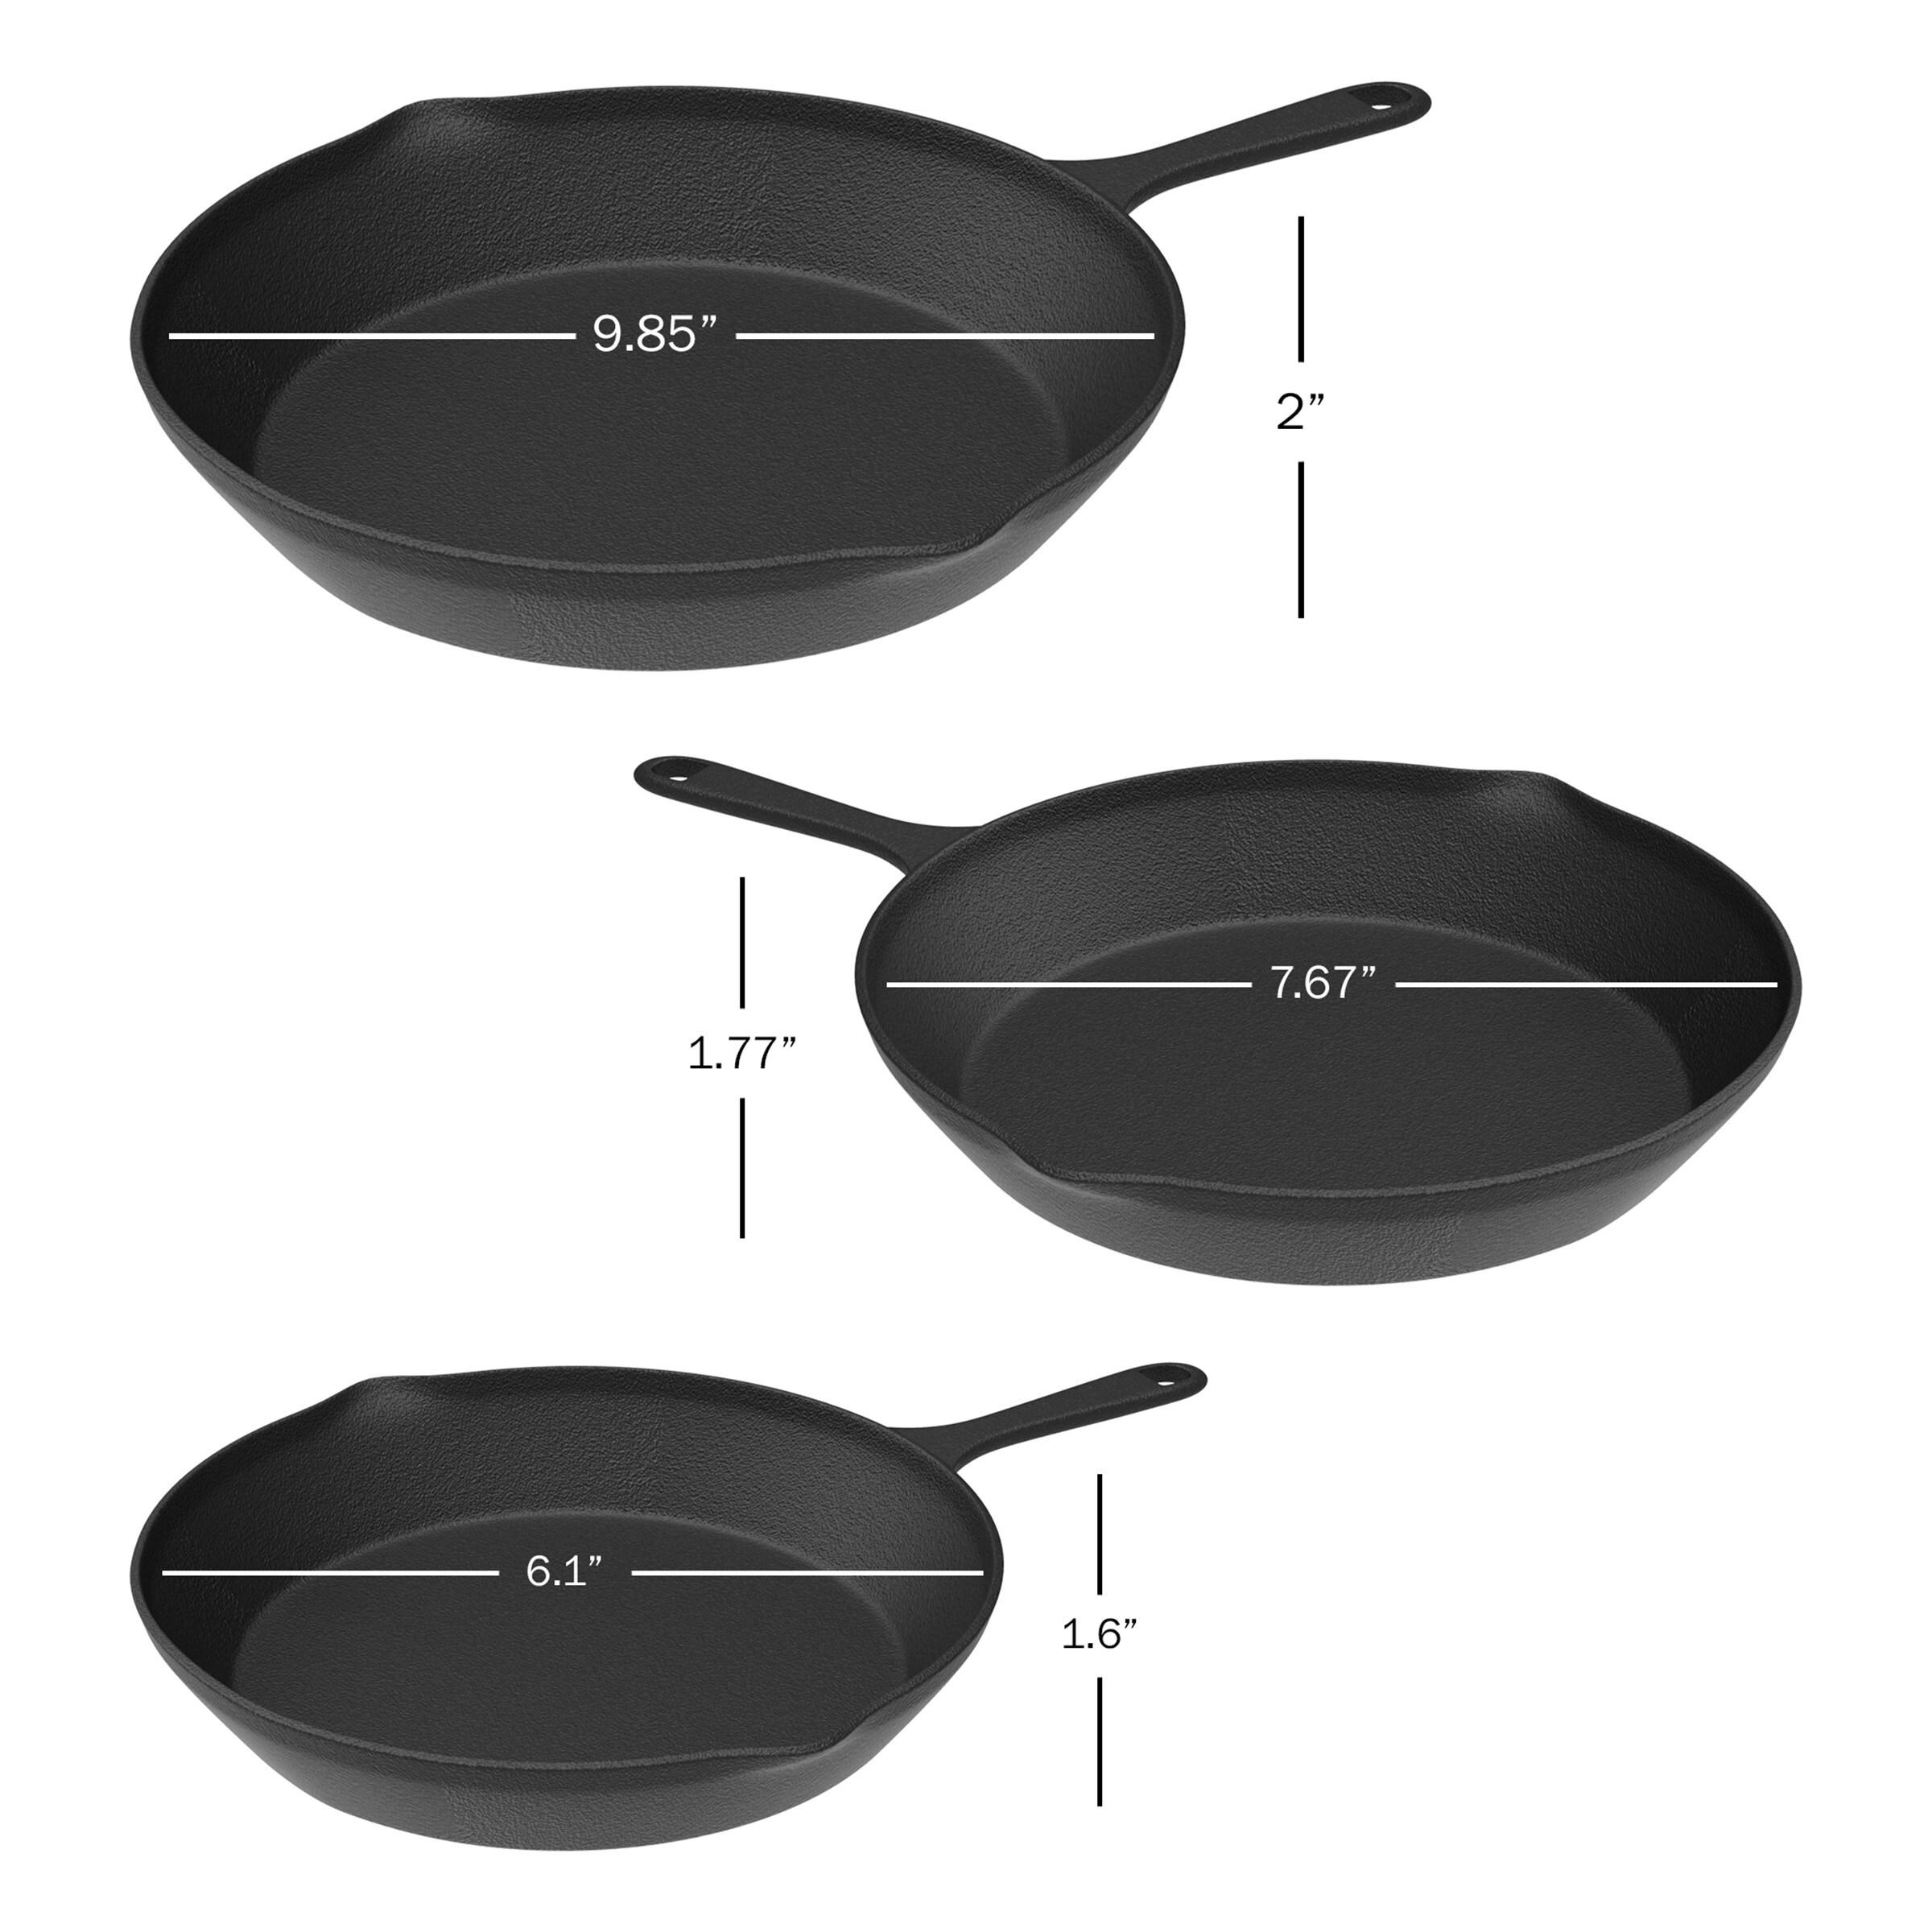 https://ak1.ostkcdn.com/images/products/is/images/direct/10af264e84269282228a892c60b4f3fc9d348da1/Frying-Pans-Set-of-3-Cast-Iron-Pre-Seasoned-Nonstick-Skillets-by-Home-Complete.jpg